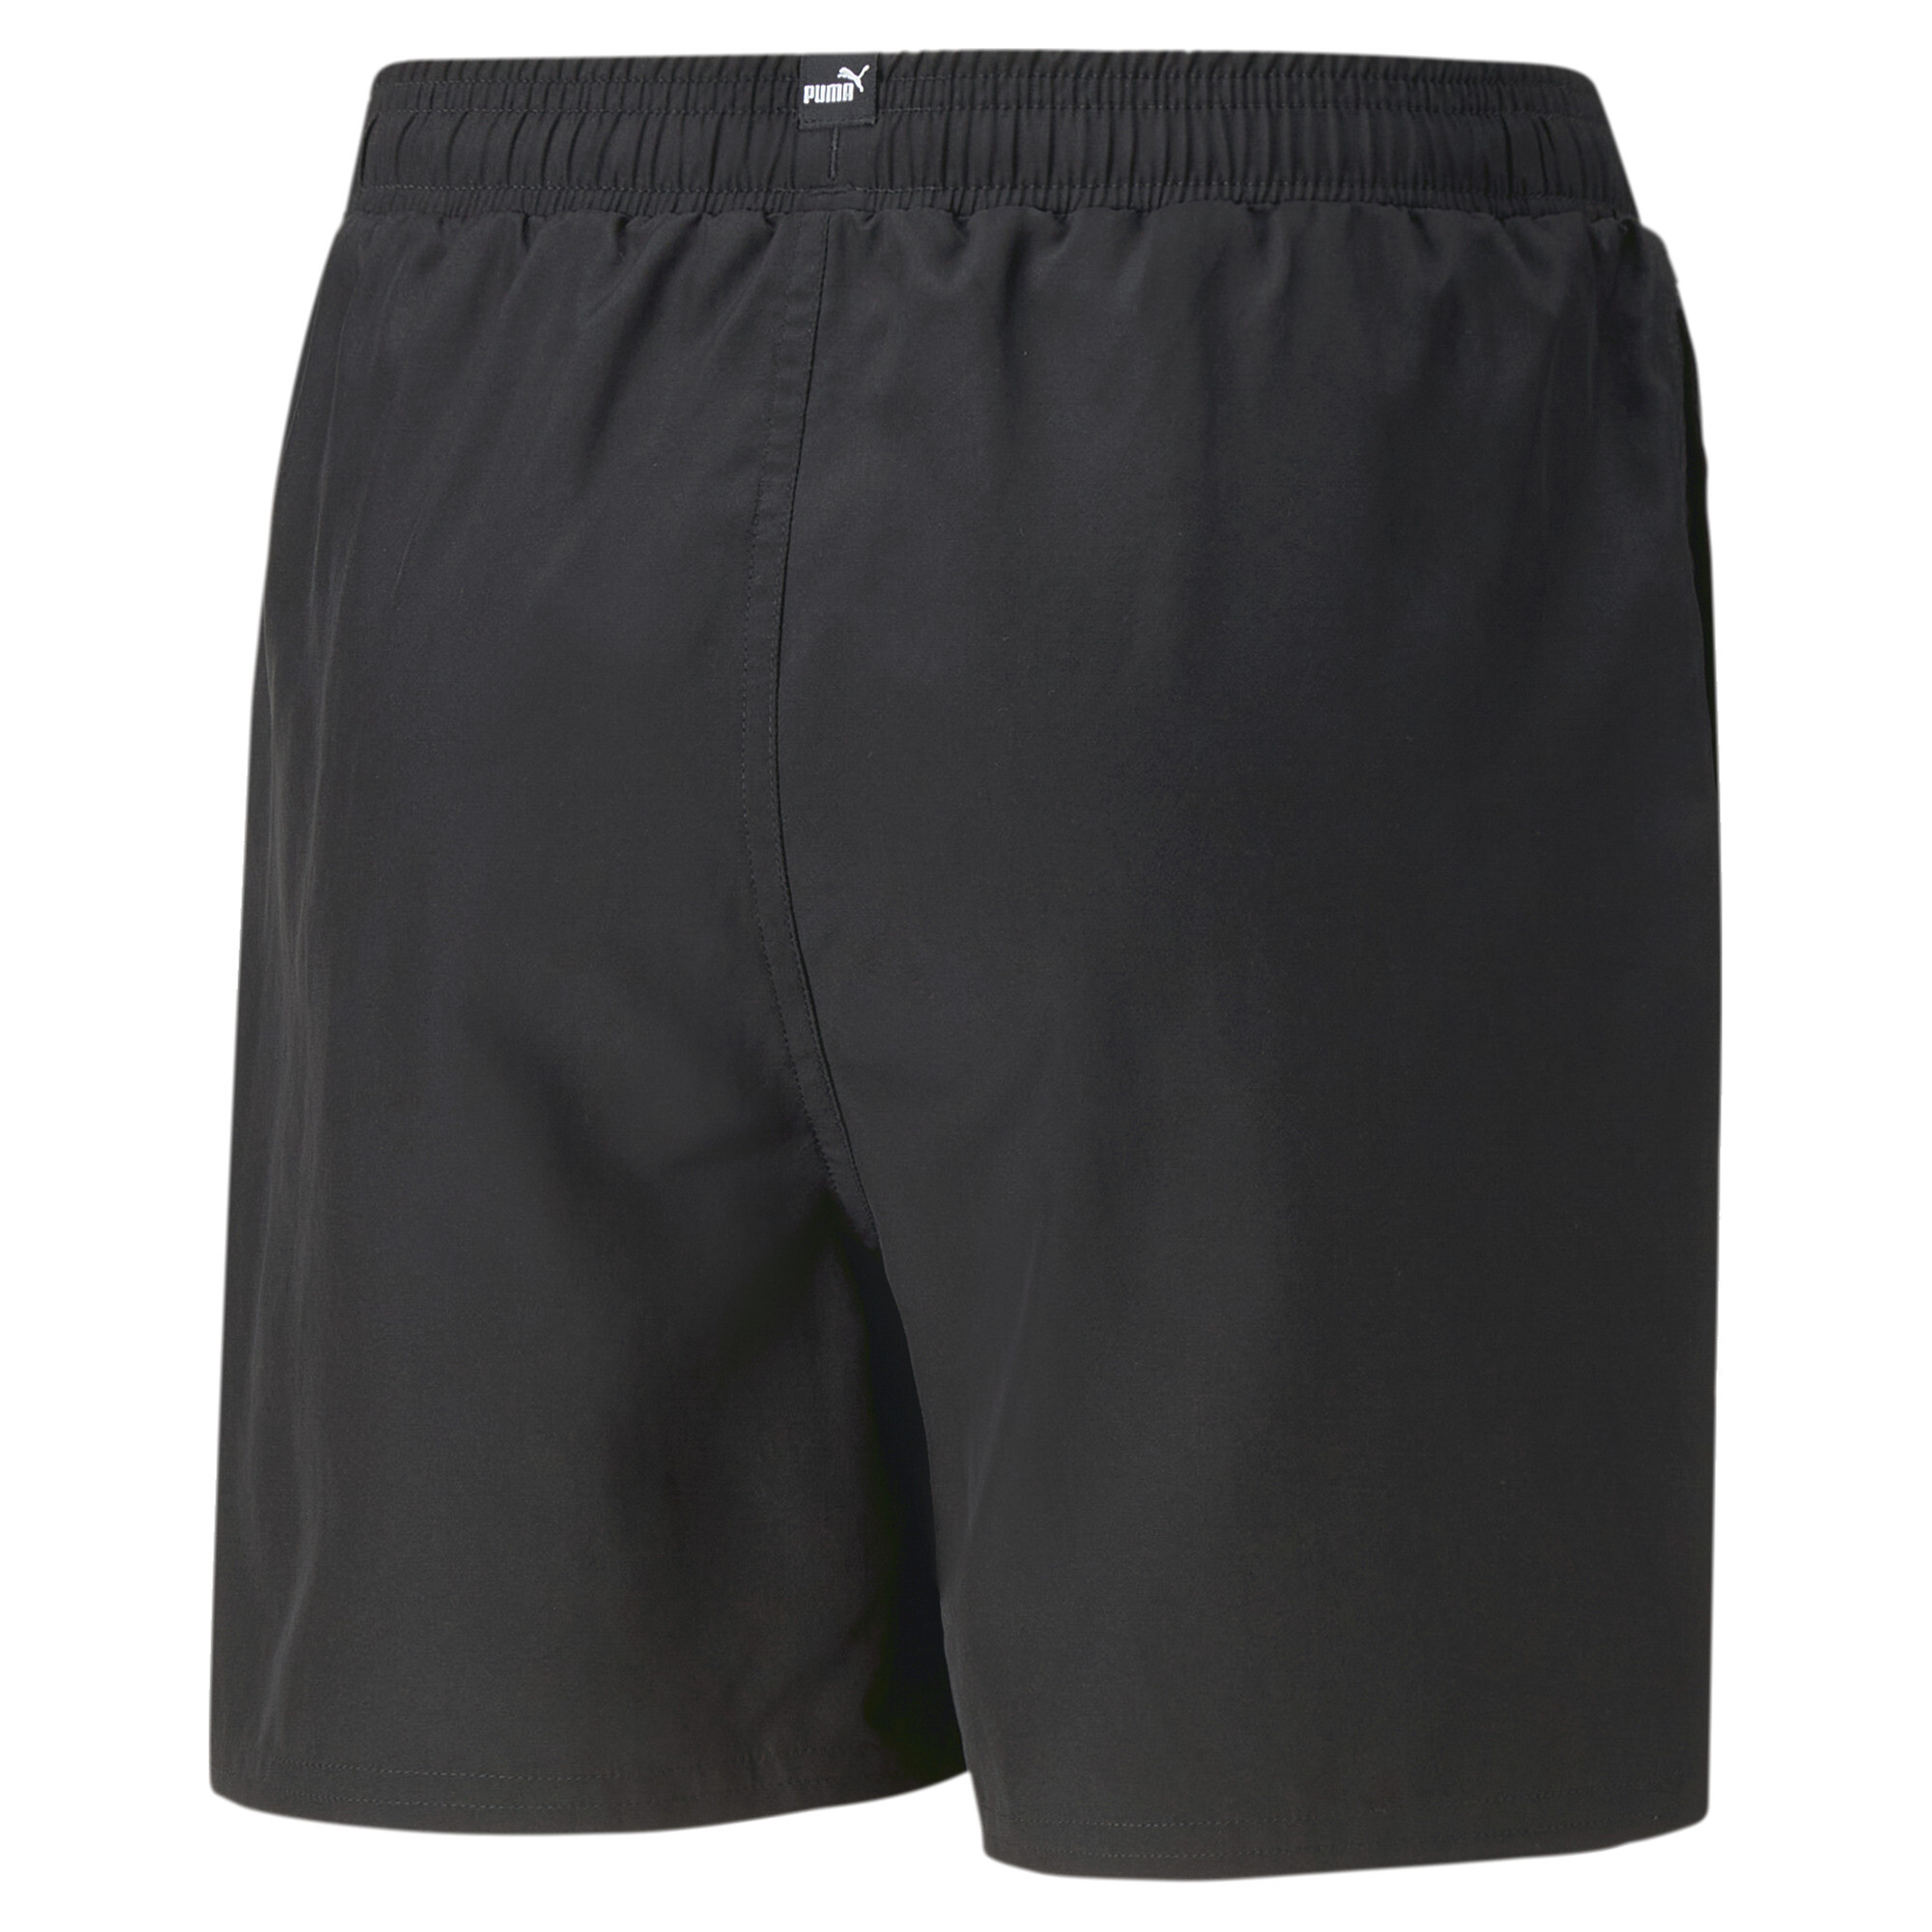 PUMA Essentials+ Logolab Woven Shorts In Black, Size 3-4 Youth